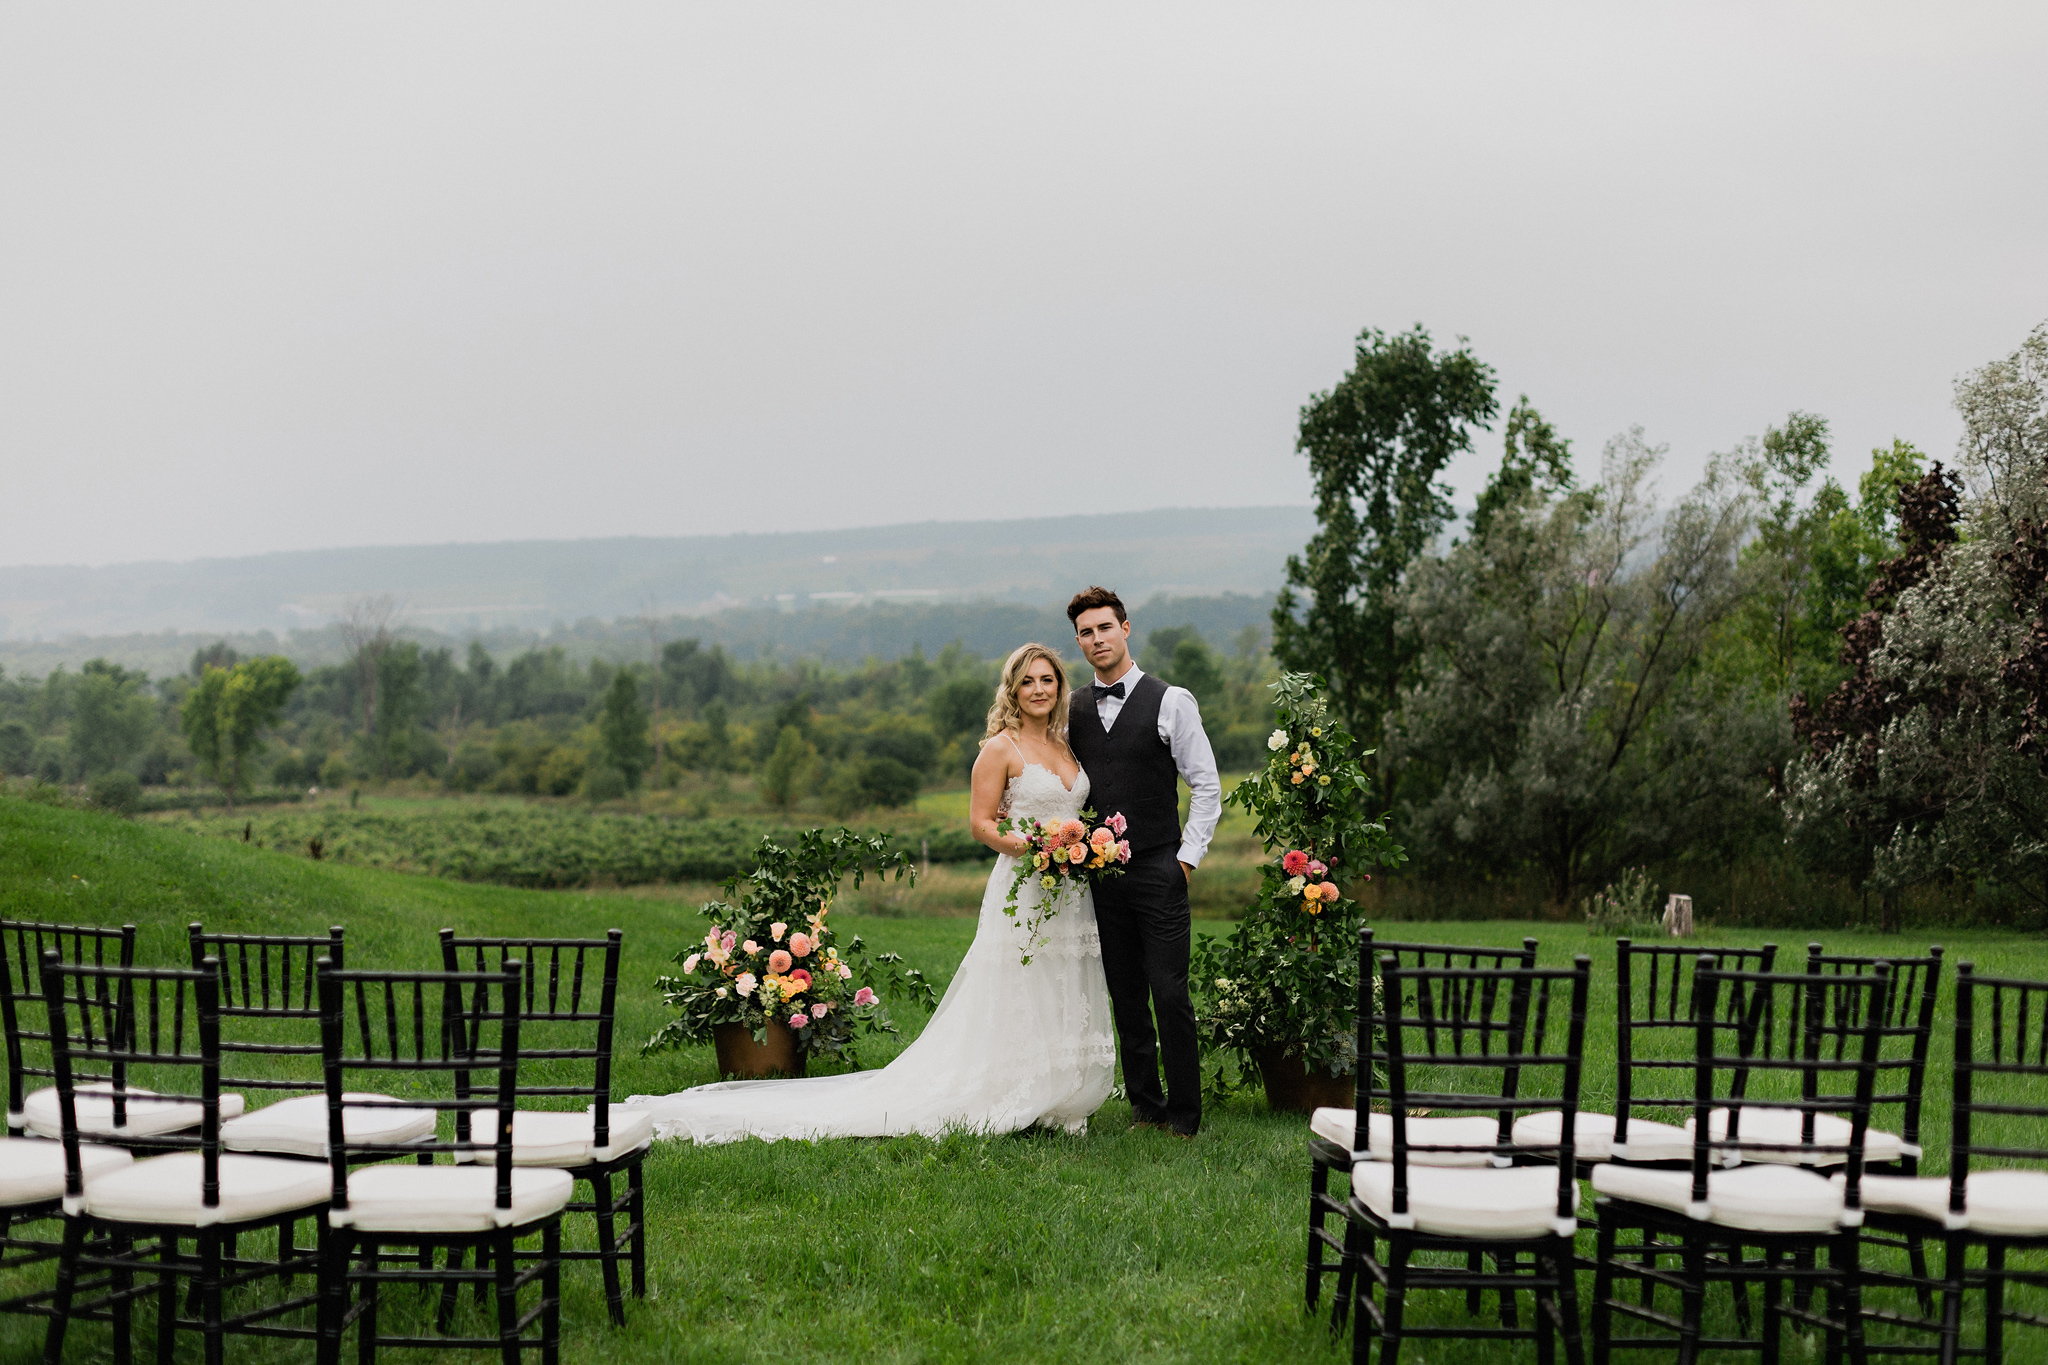 Bridge and groom at ceremony site with sweeping landscape at Cof